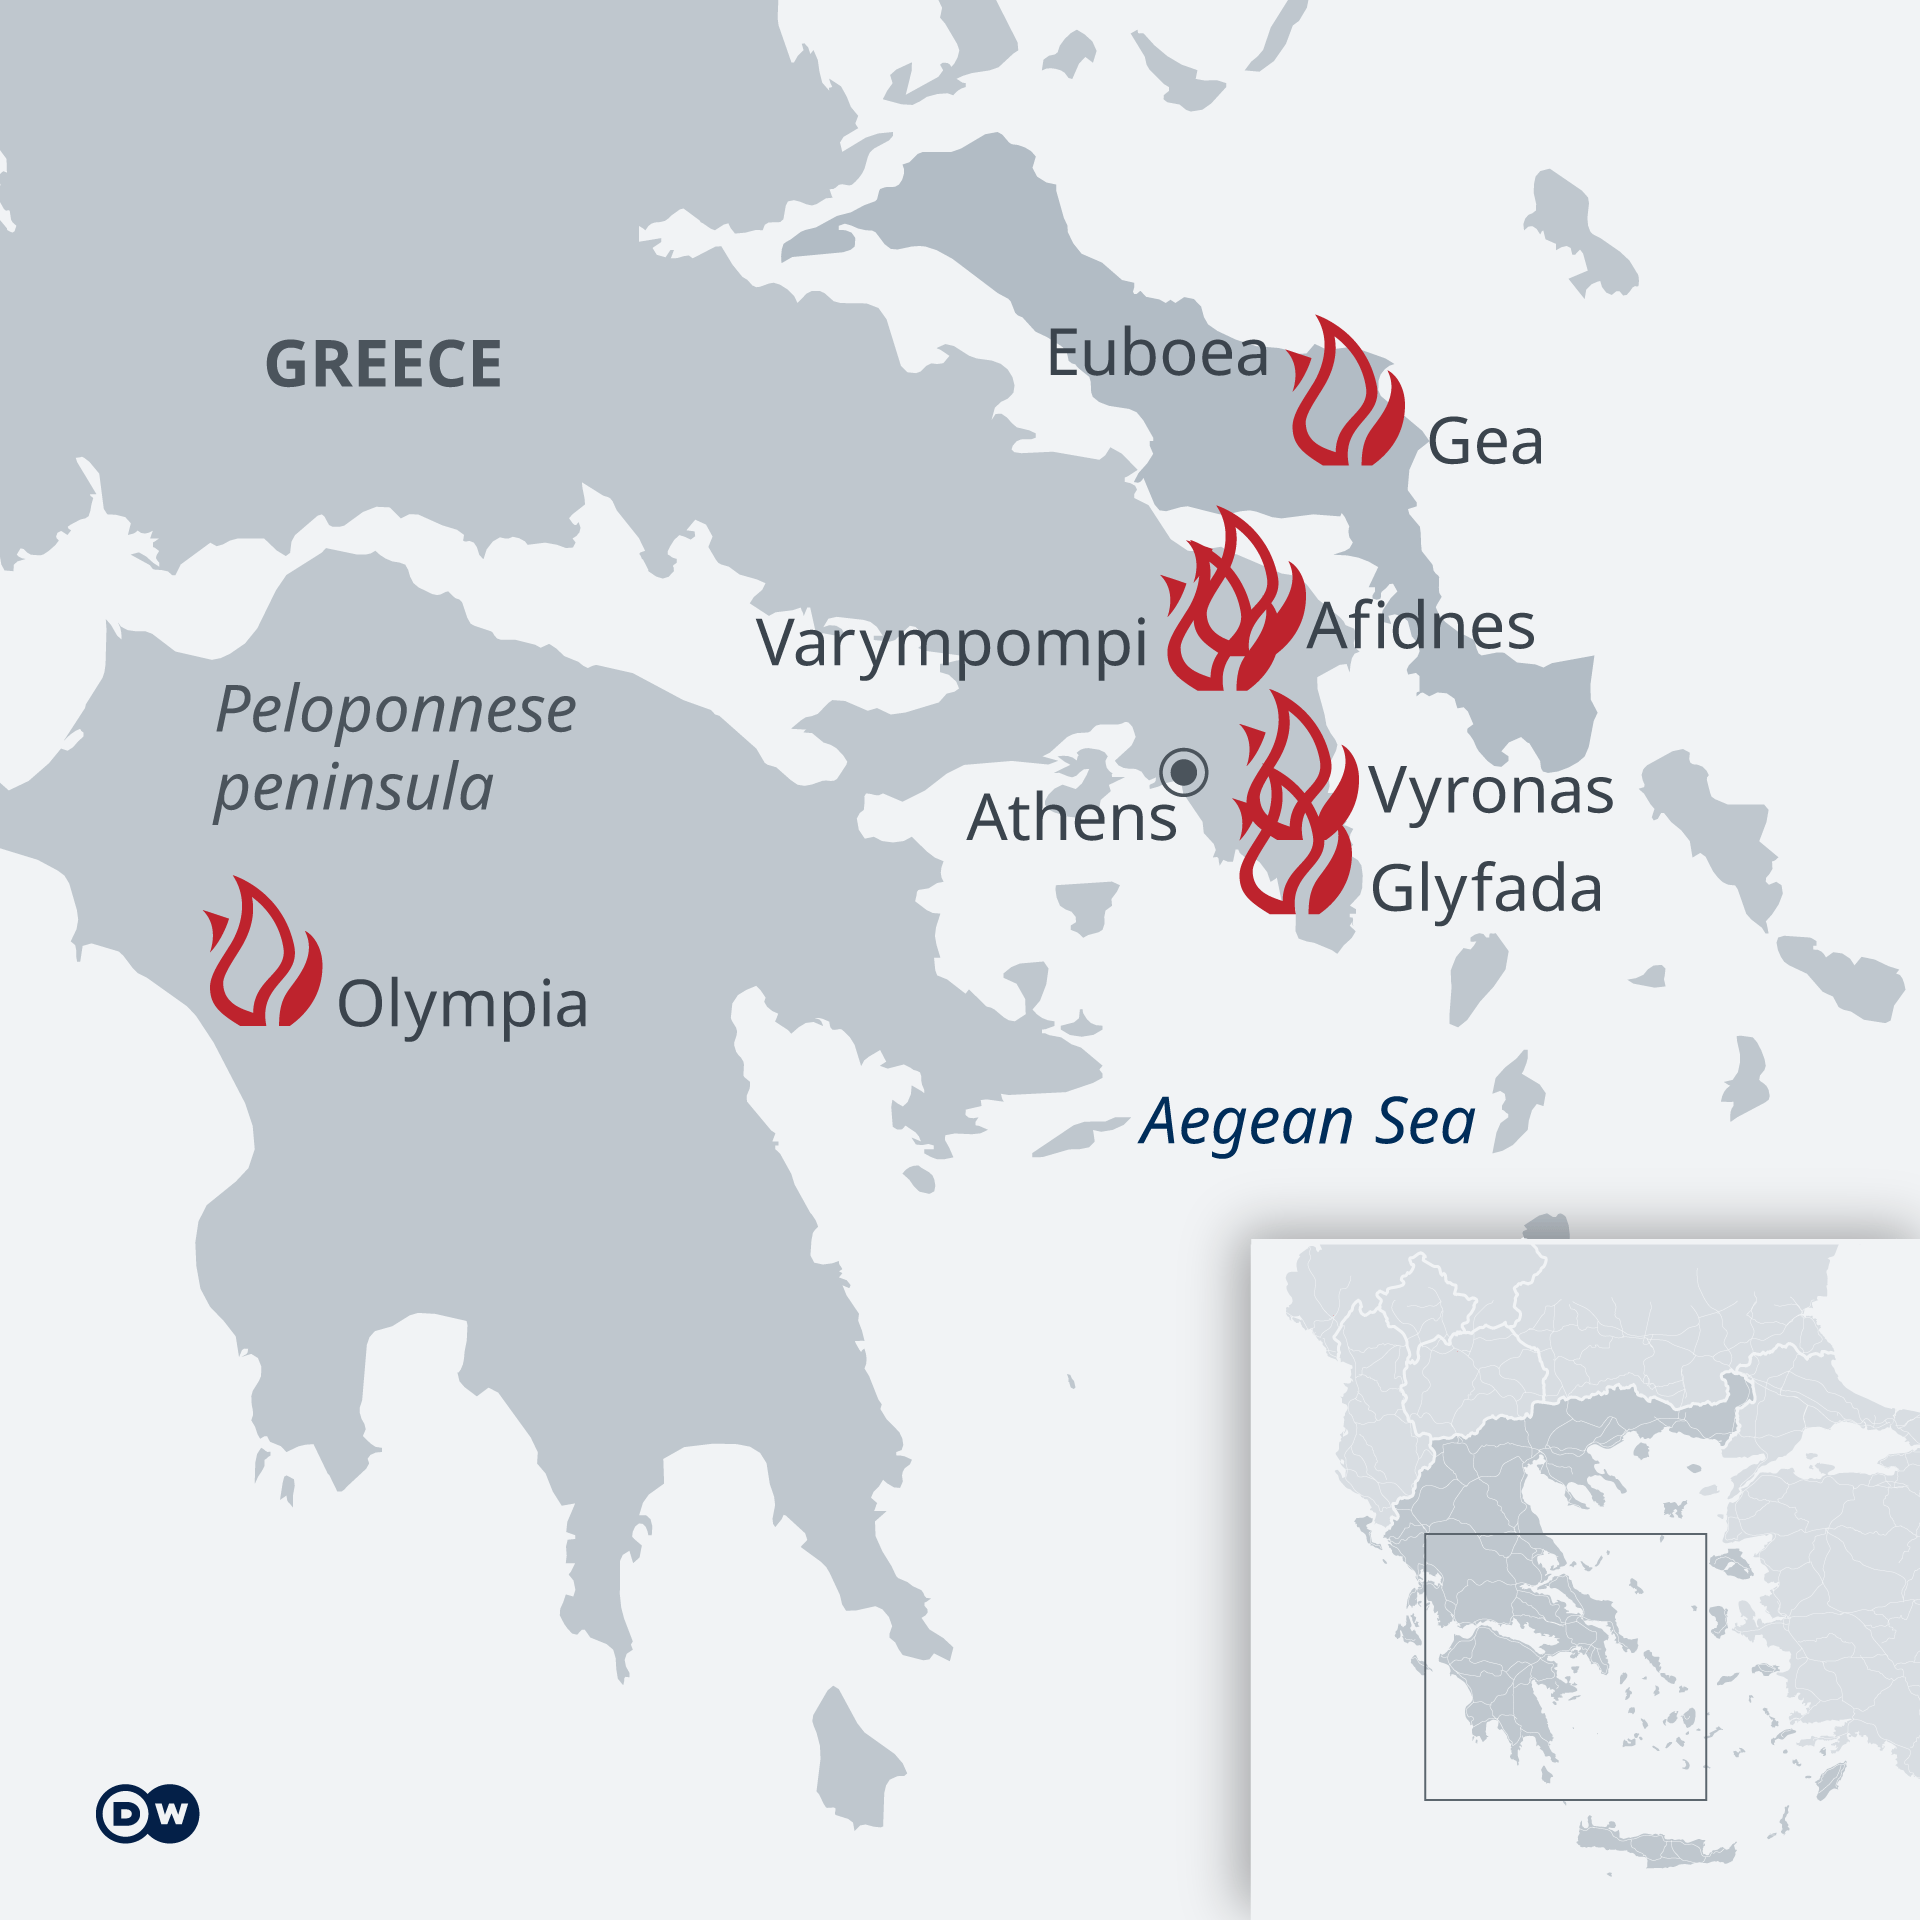 A map of 2021 wildfires in Greece